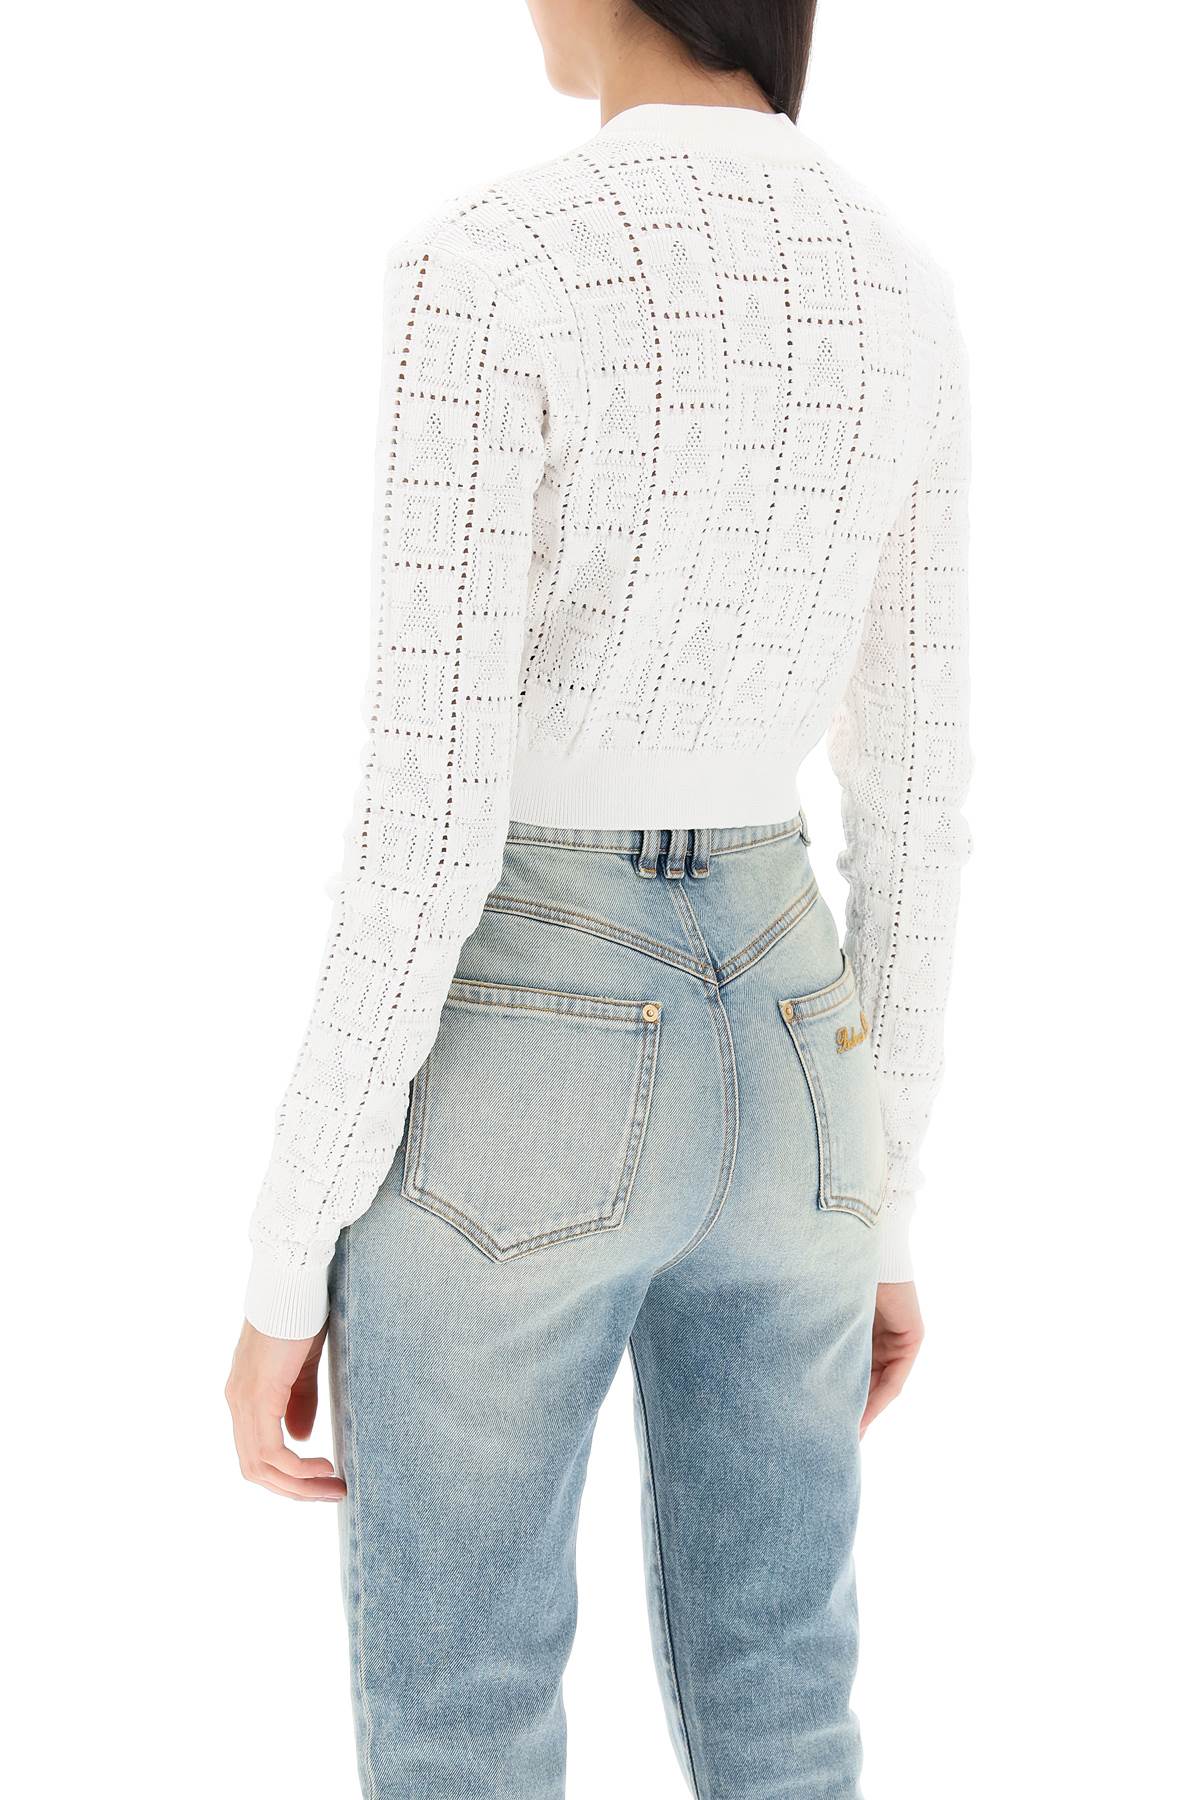 Shop Balmain Cropped Cardigan With Jewel Buttons | Pointelle Knit | White | Women's